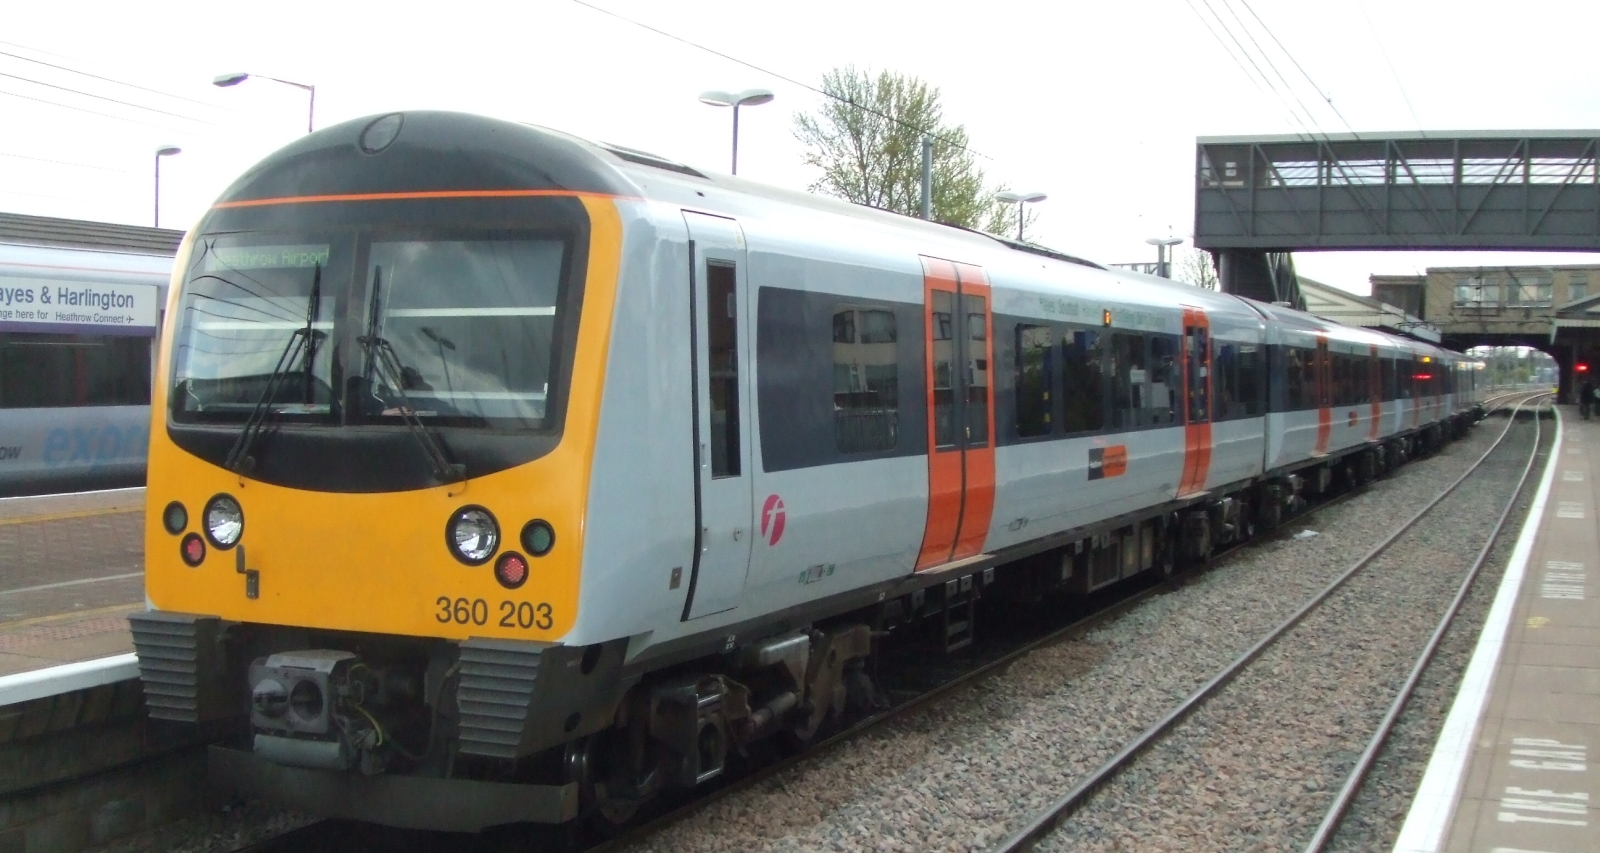 Heathrow Connect 360 203 in April 2008 at Hayes & Harlington station